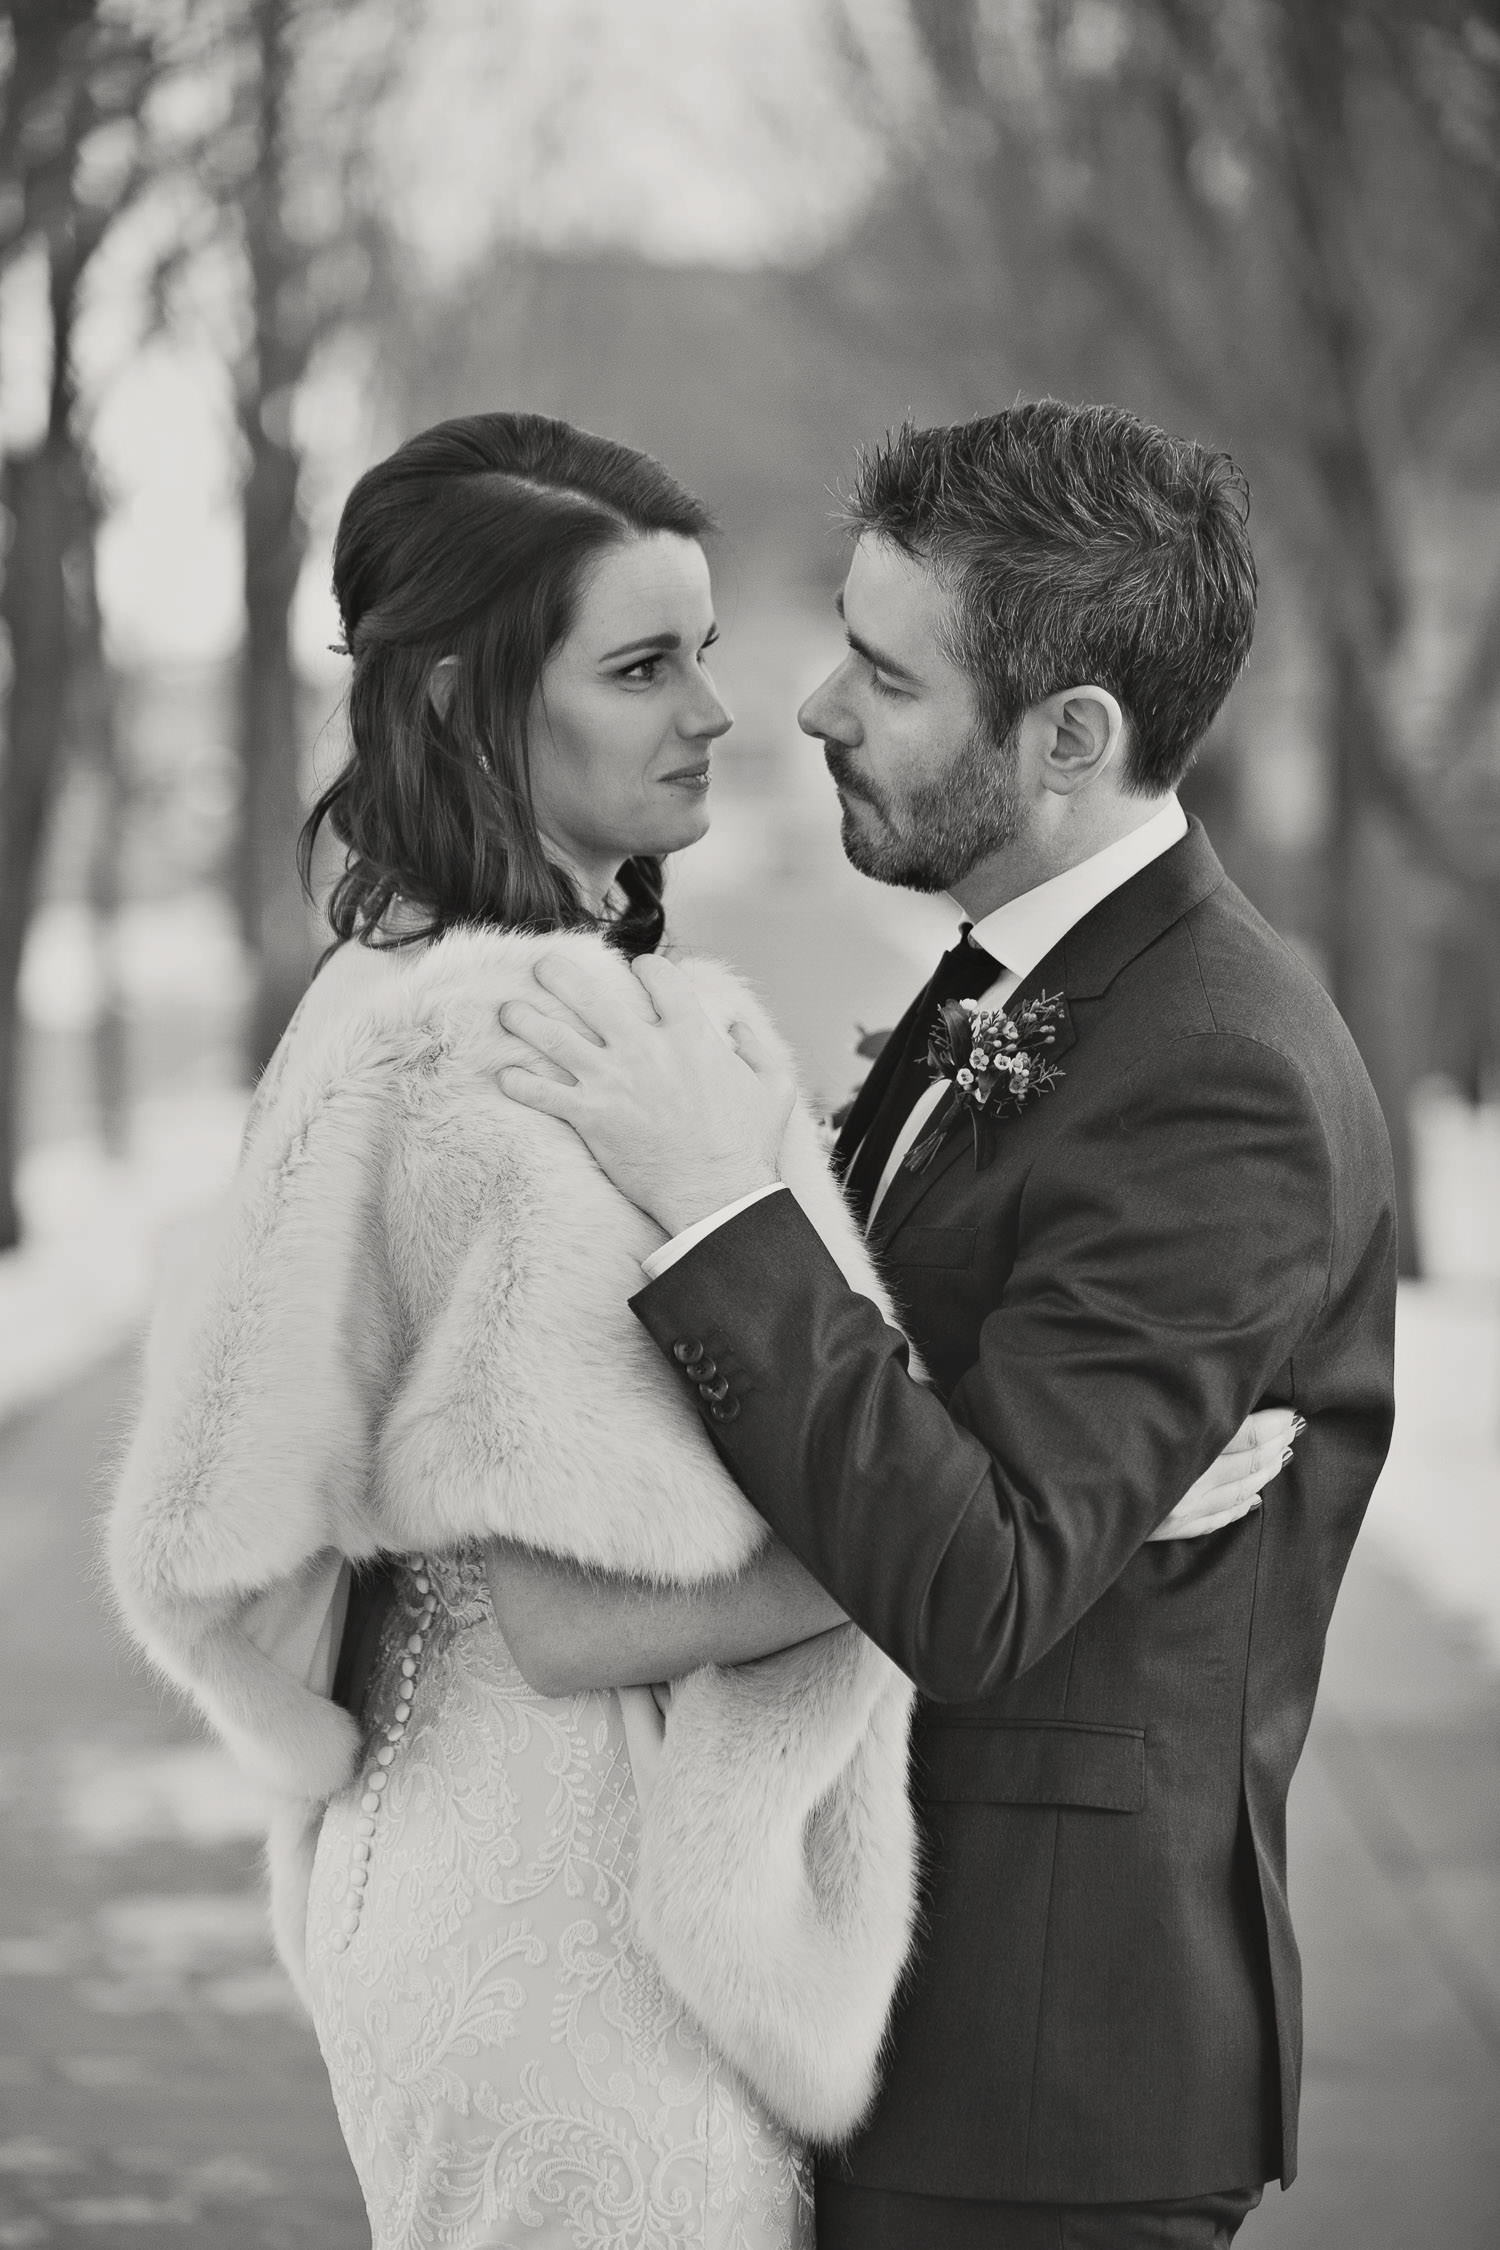 Winter wedding portraits outside Venue 308 captured by Tara Whittaker Photoography